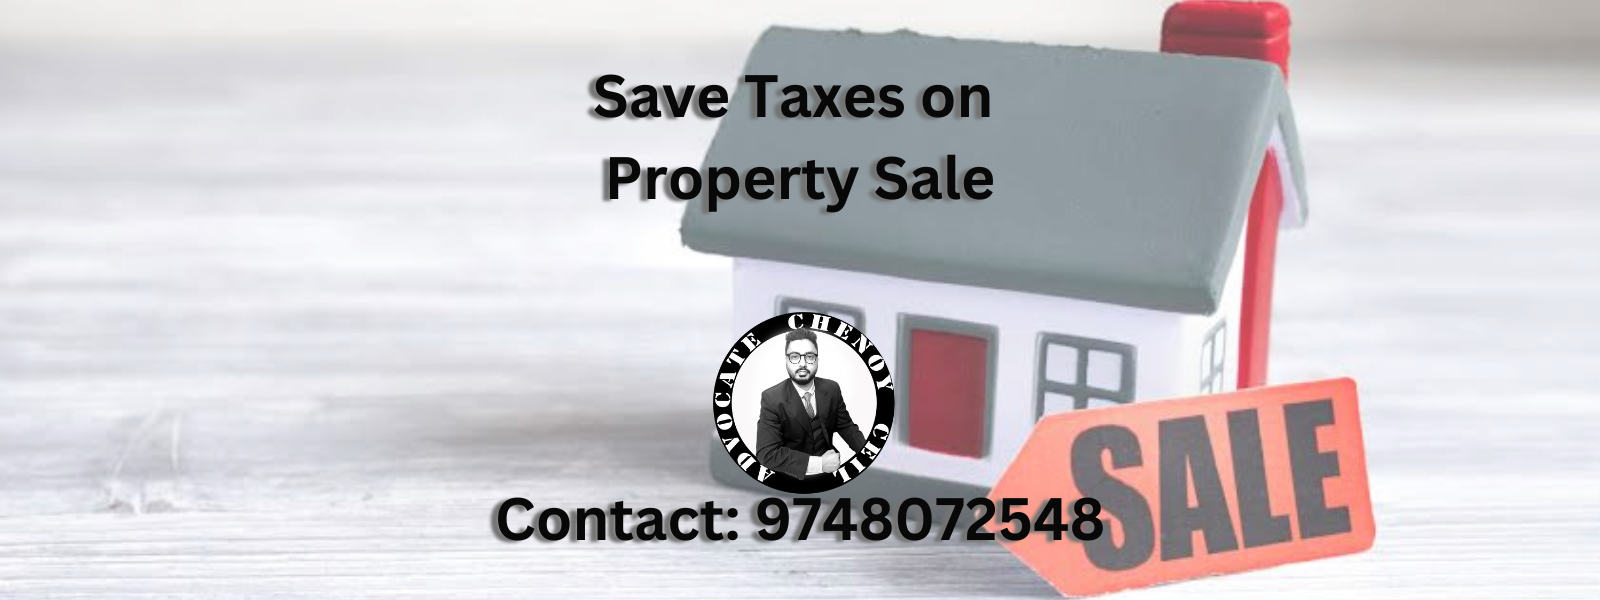 Save Taxes on Property Sale